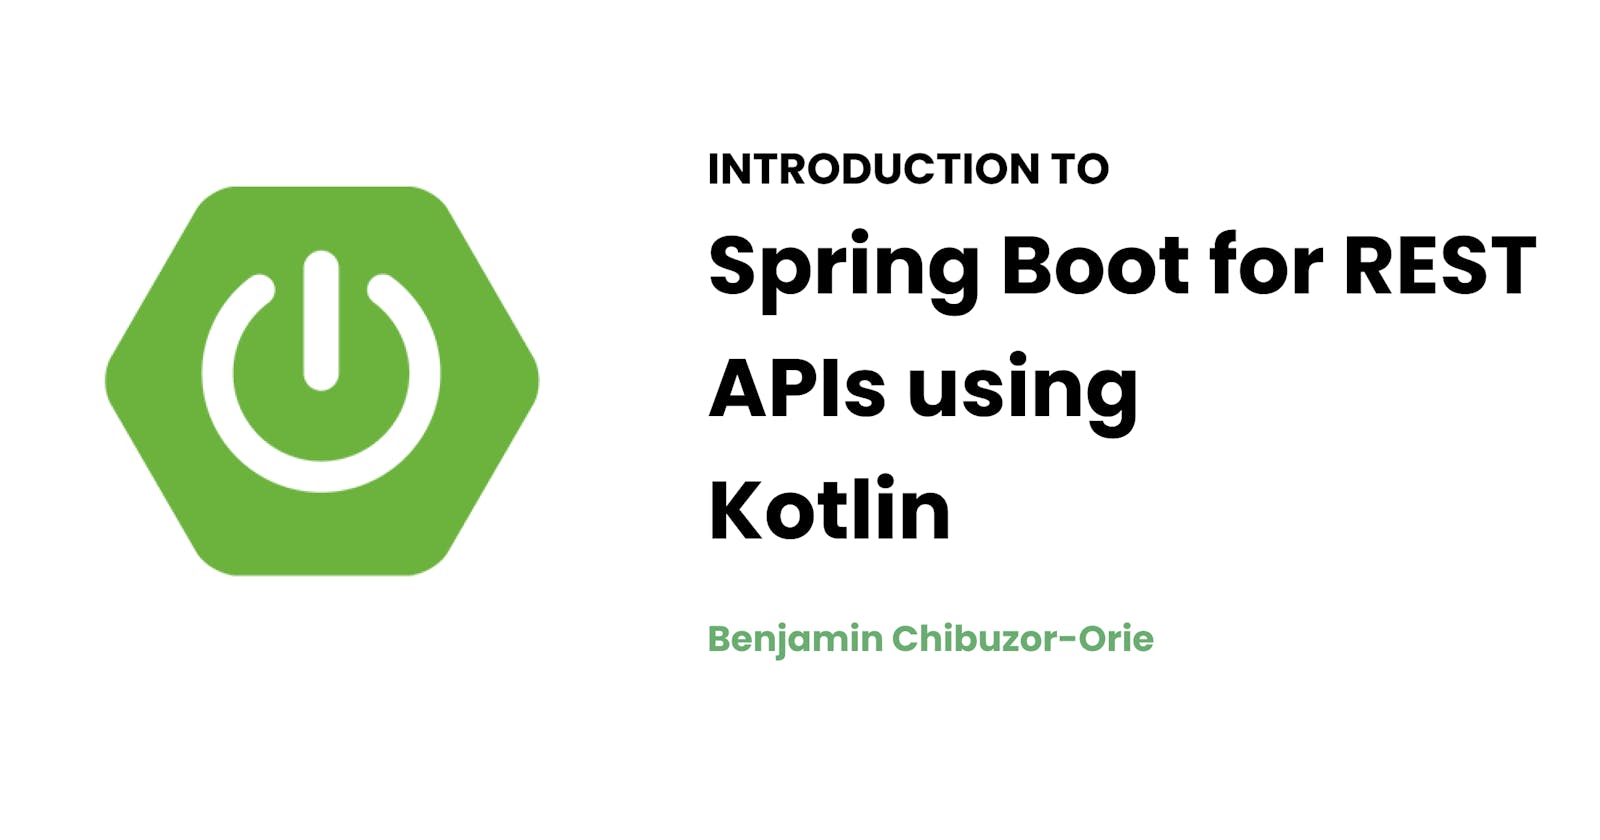 Introduction to Spring Boot for REST APIs using Kotlin